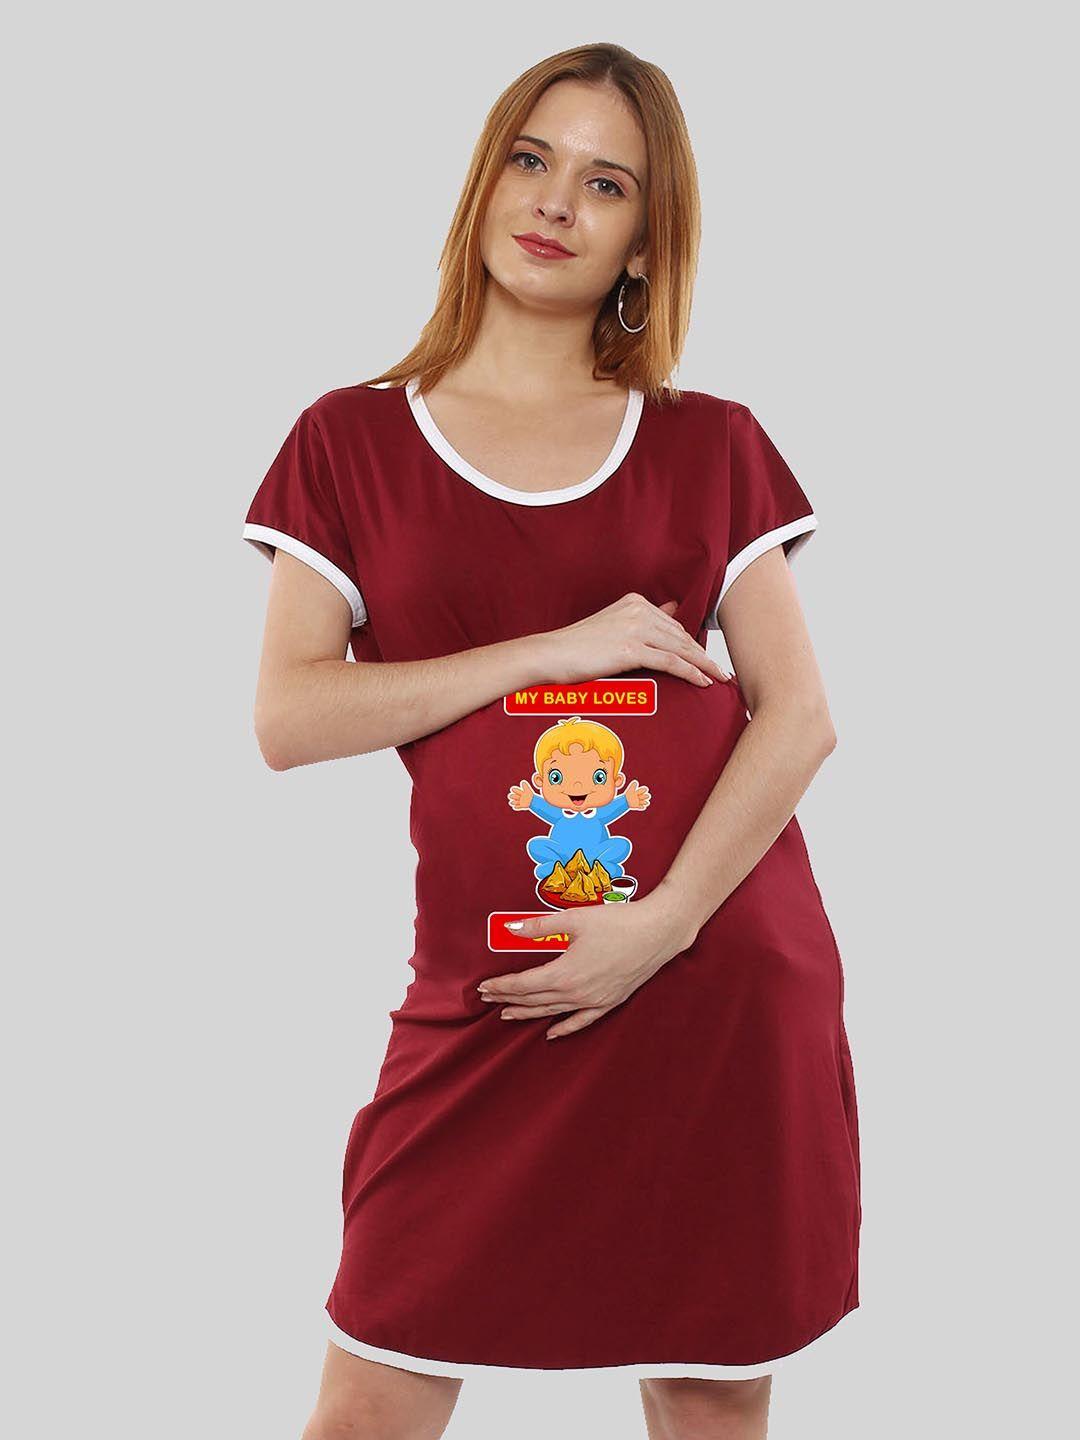 sillyboom graphic printed maternity t-shirt dress